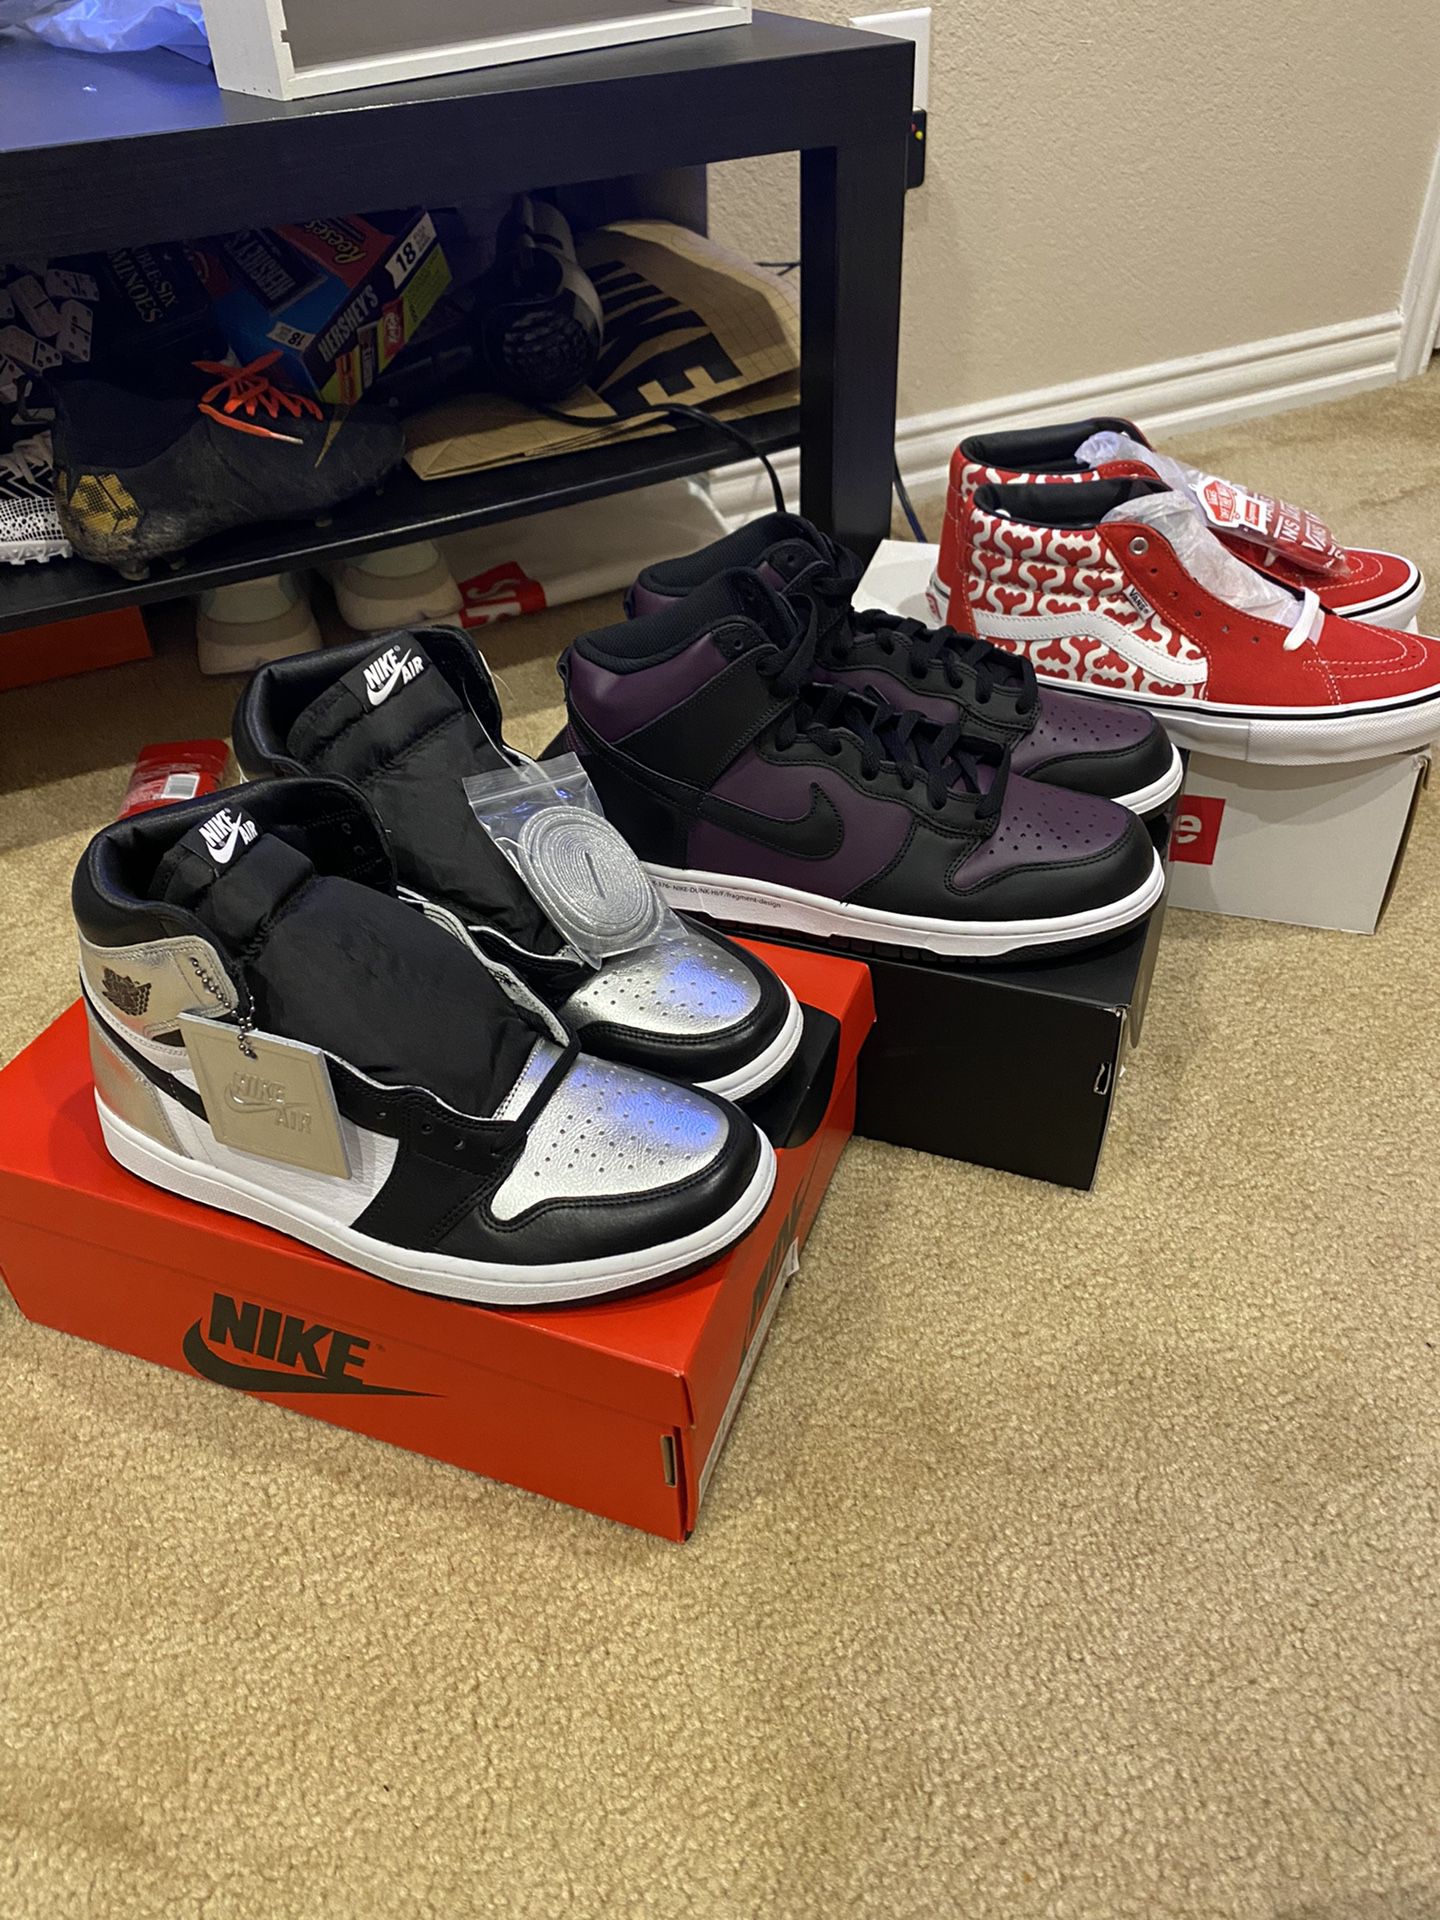 Silver Toe , Fragment Dunk , Supreme Vans  Retail For All